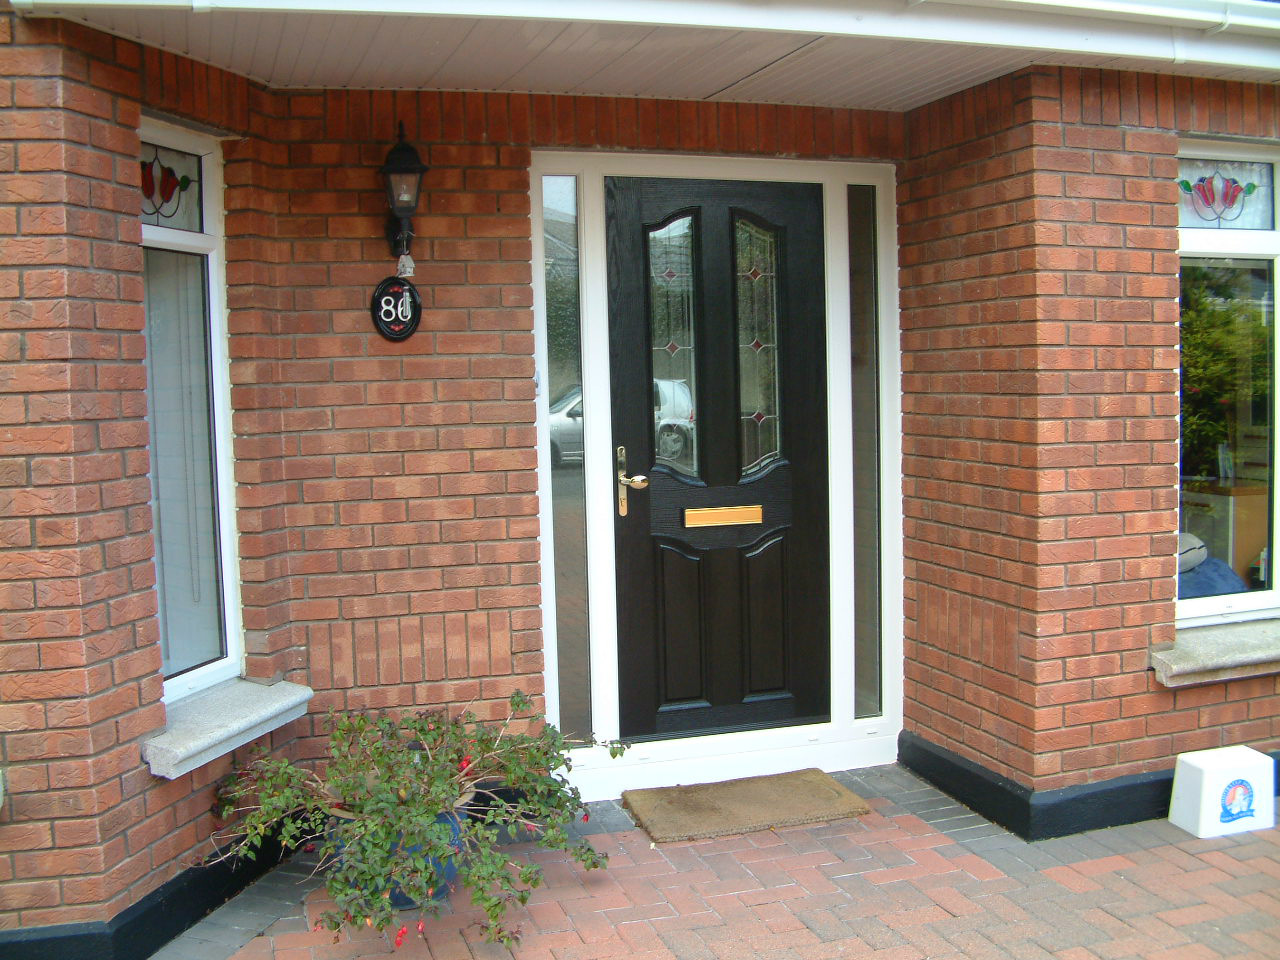 BLACK APEER APL2 COMPOSITE FRONT DOOR FITTED BY ASGARD WINDOWS IN DUBLIN 18.